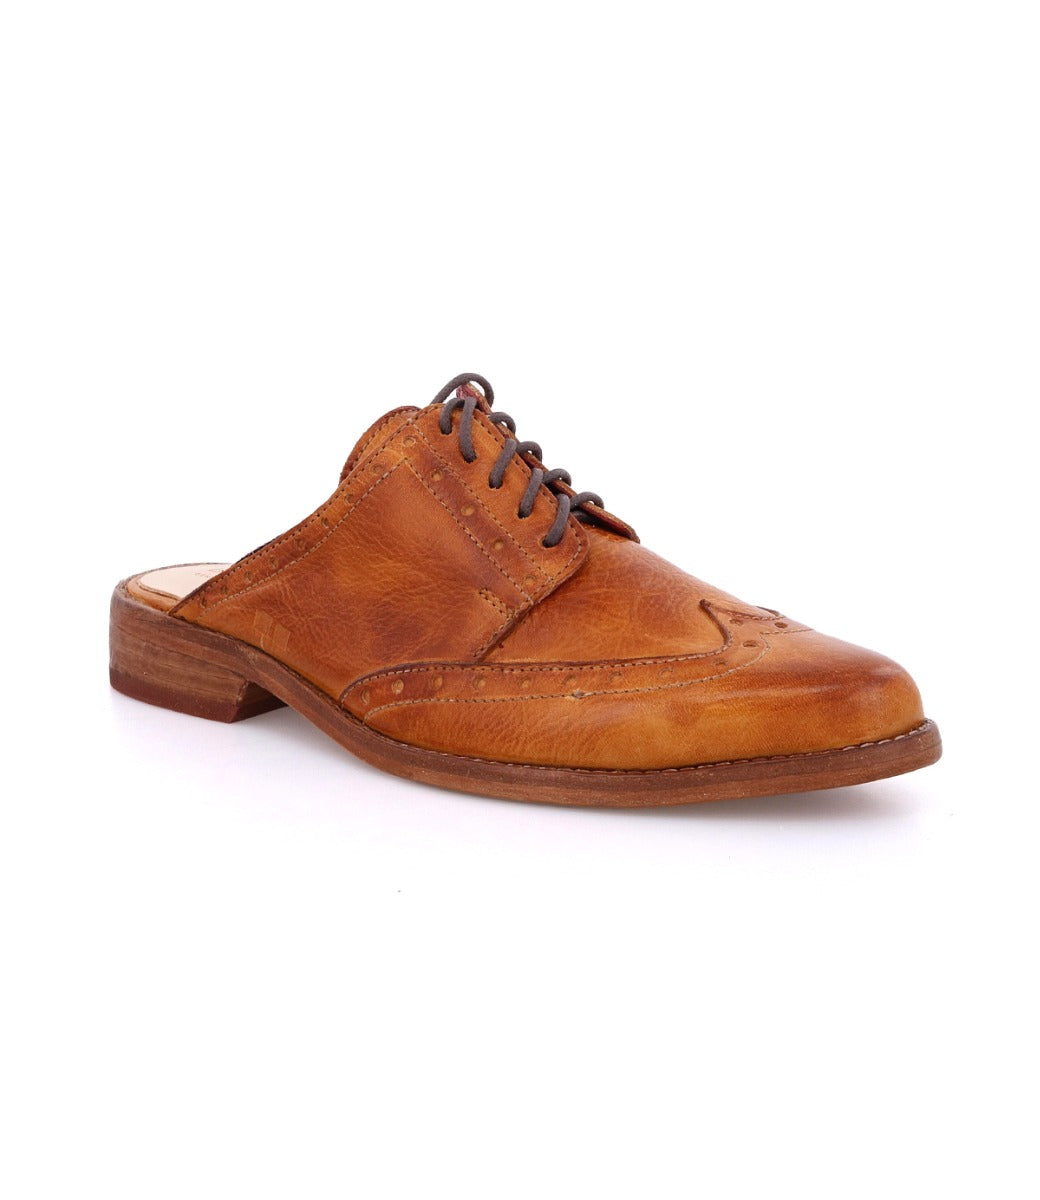 A men's Mickie tan lace up oxford shoe by Bed Stu.